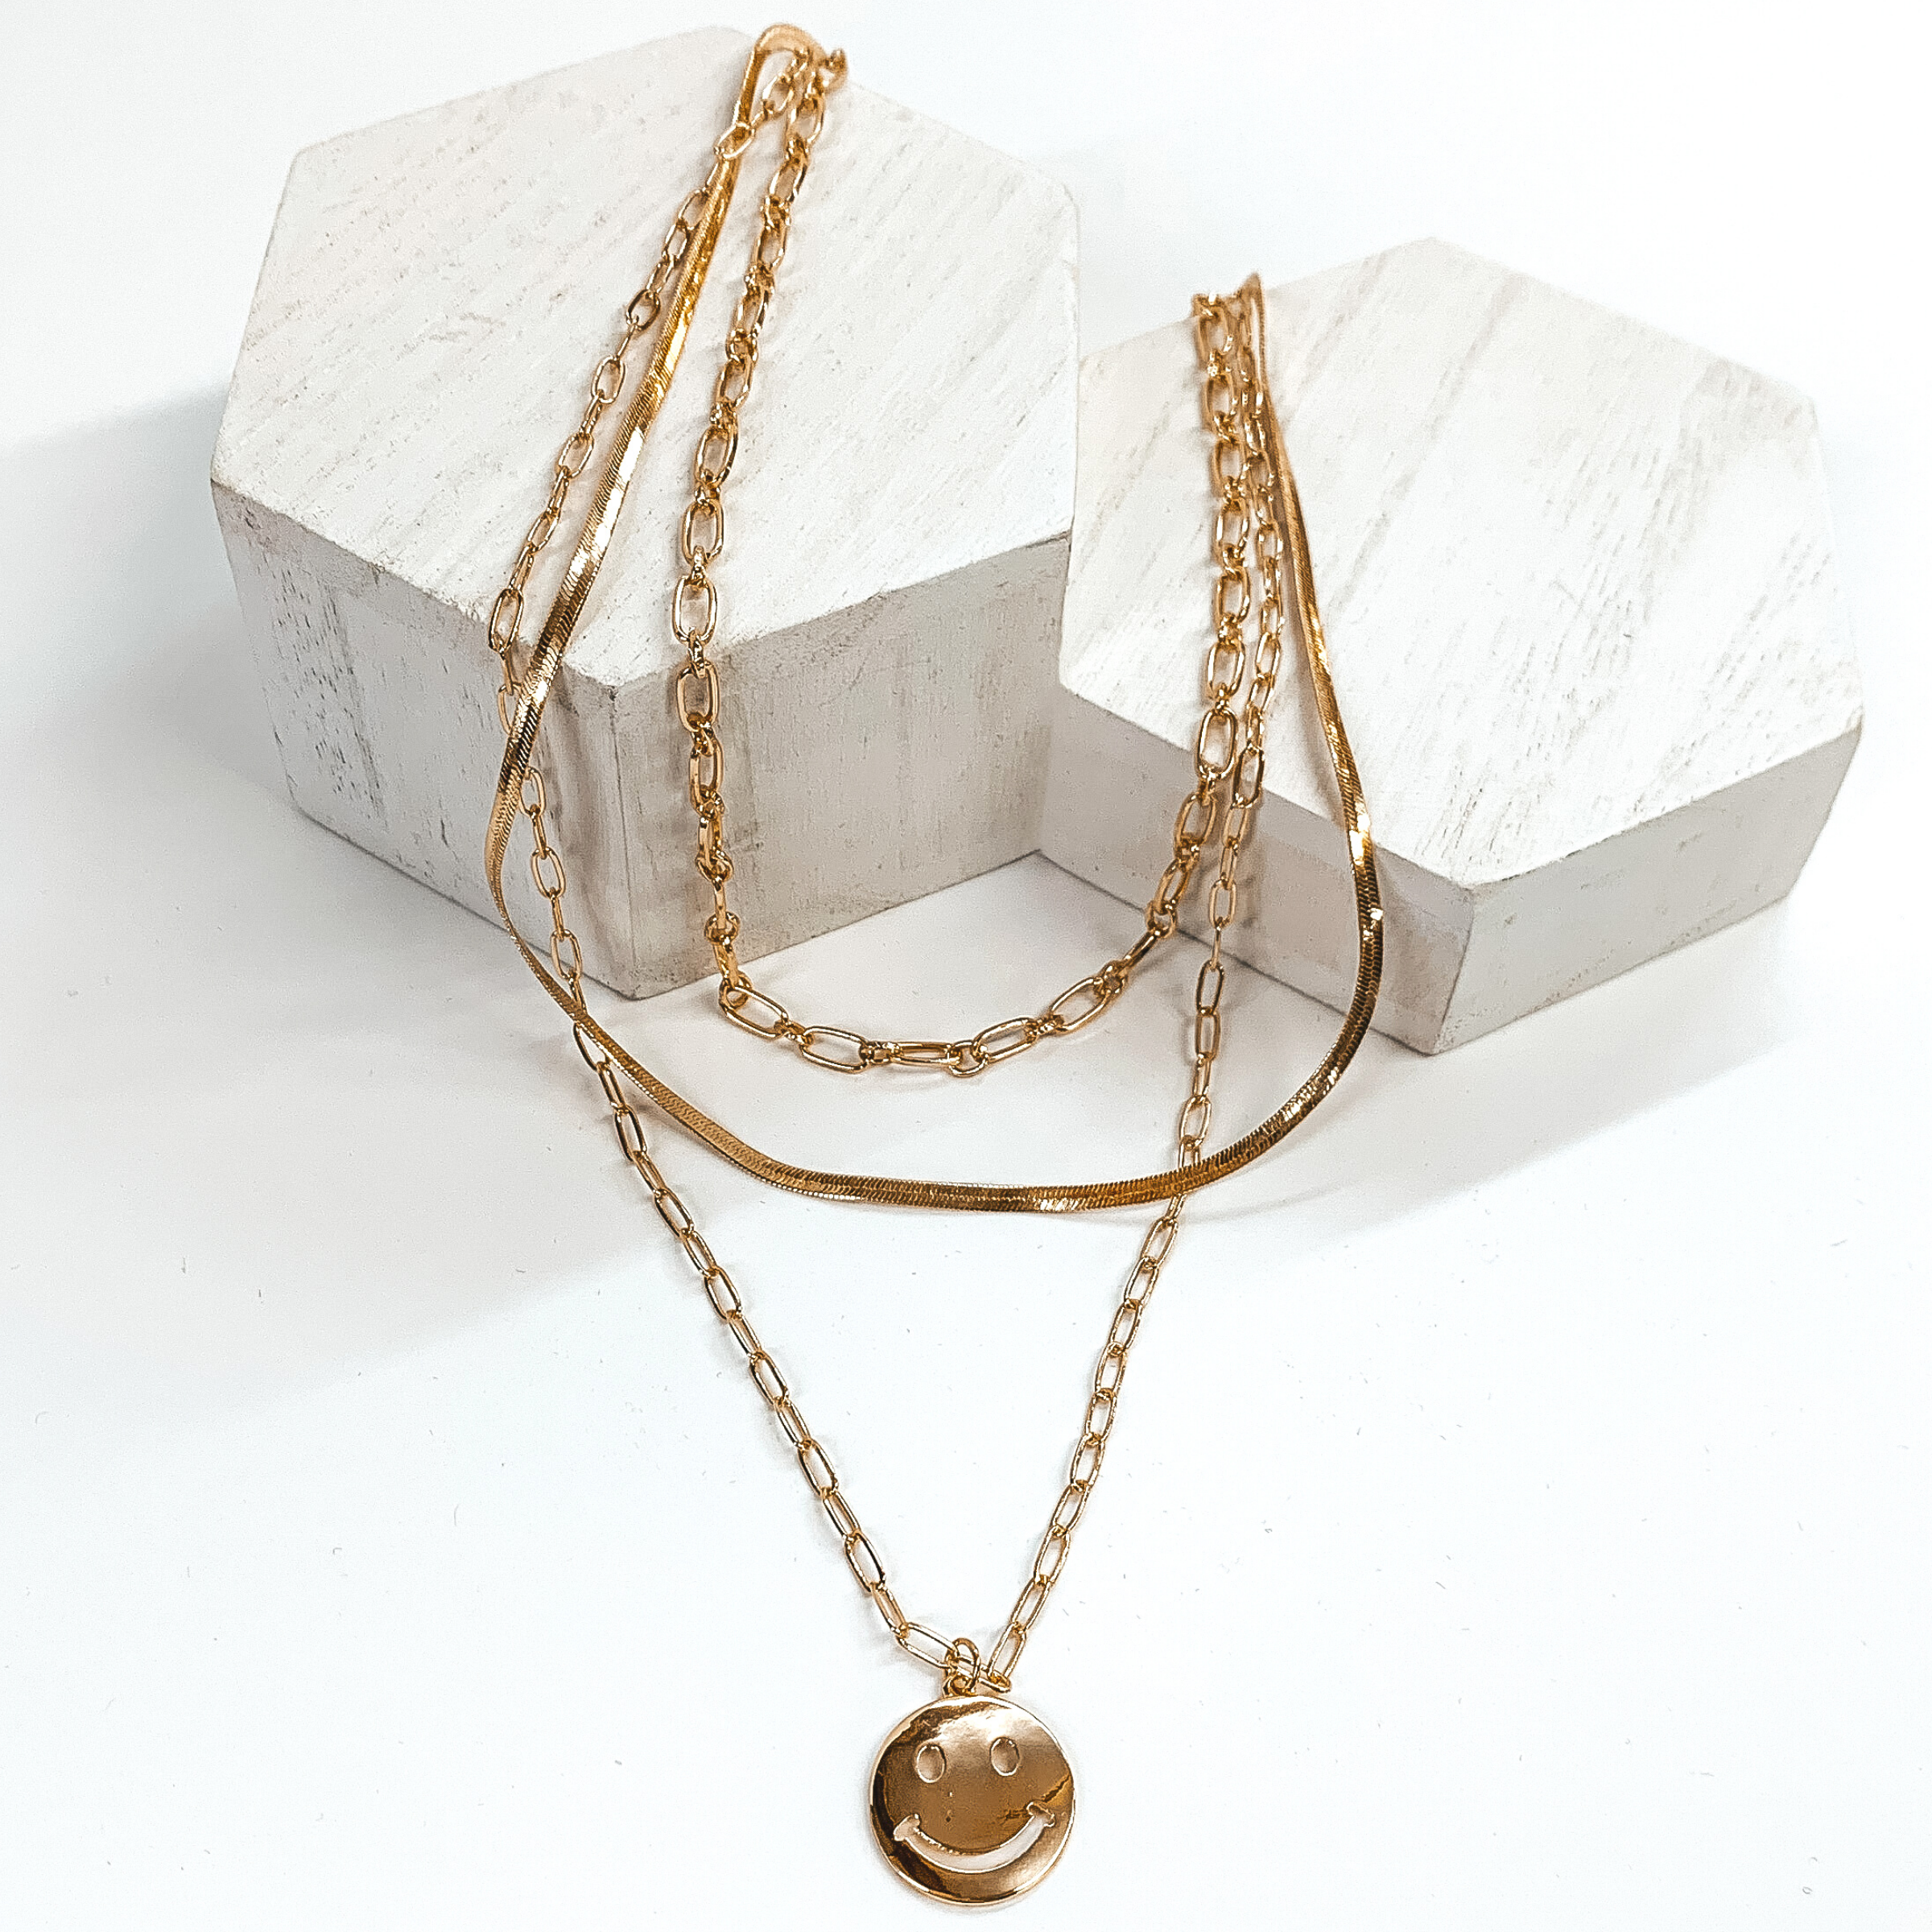 Multi chained gold necklace with the longest strand including a gold smiley face pendant. This necklace is pictured laying on white blocks on a white background. 